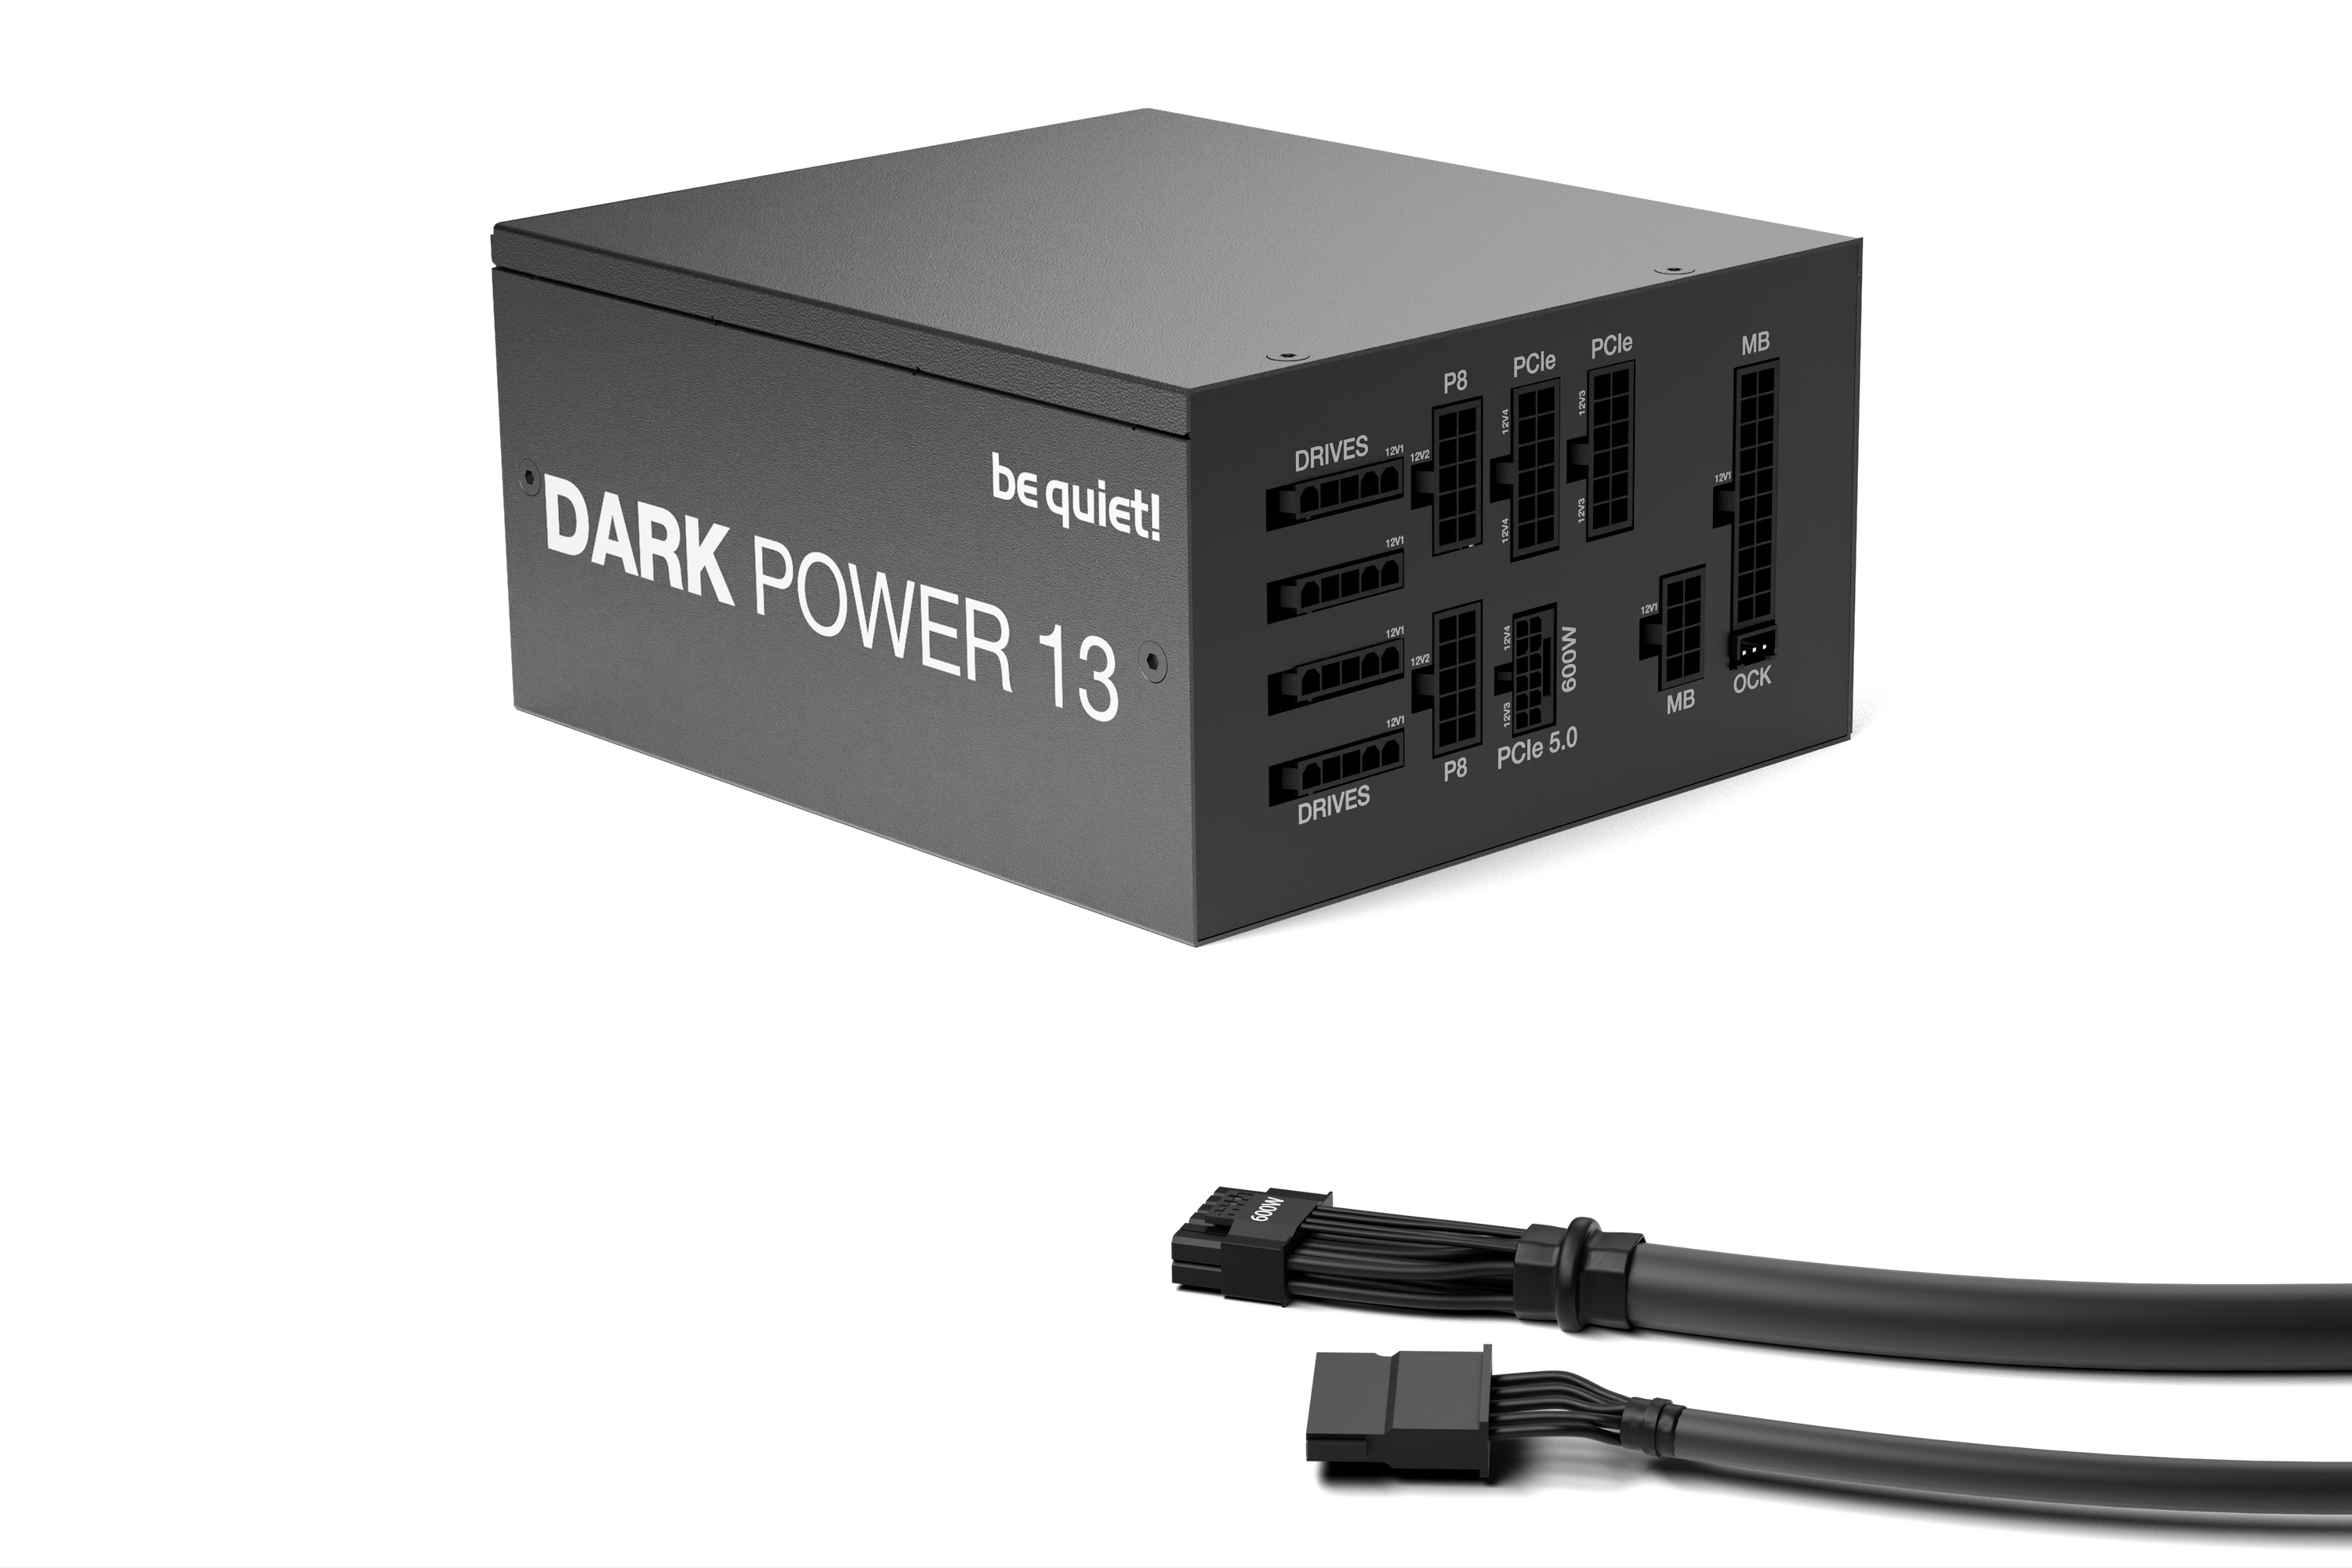 be quiet! Dark Power 13 750W, ATX3.0, 80+Titanium, 1x 12VHPWR (600W), ErP, Energy Star 8 APFC, Sleeved, 4xPCI-Ex(6+2), 12xSATA, 3xPATA, Full Cable Management, Switchable 4 or 1 Rail, Silent Wings 135